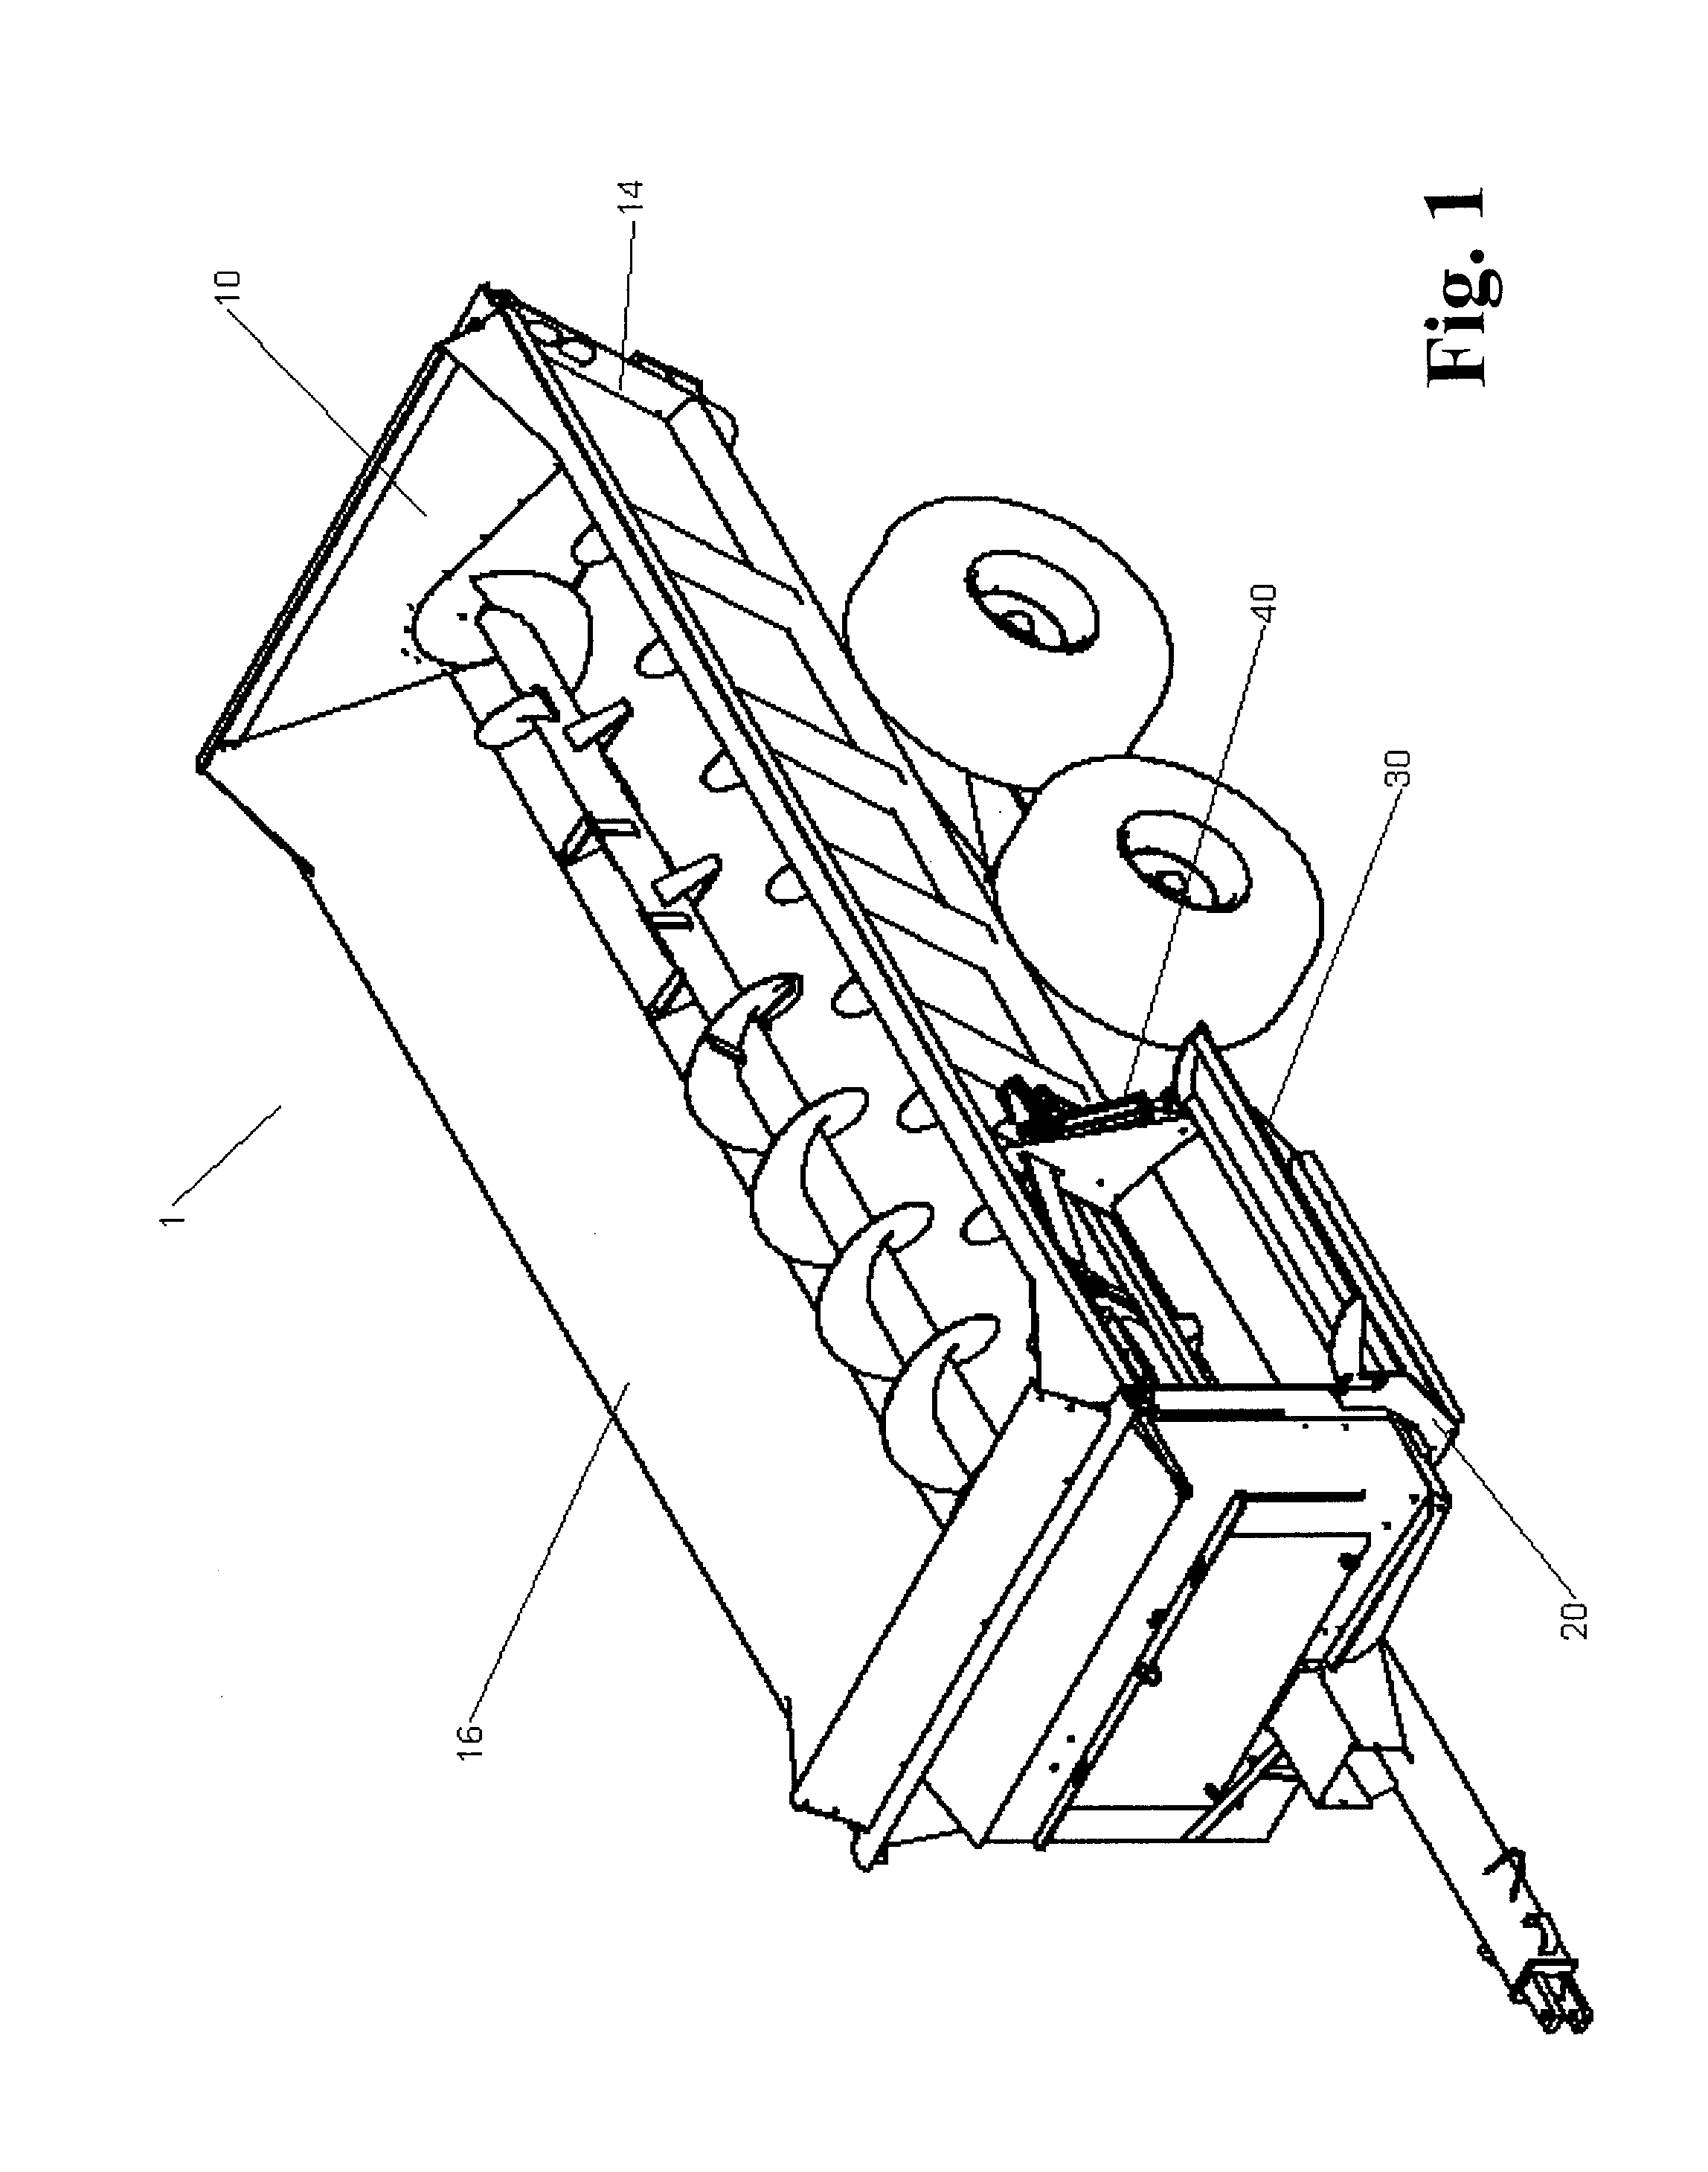 Combination material deflector and door seal for a material spreader